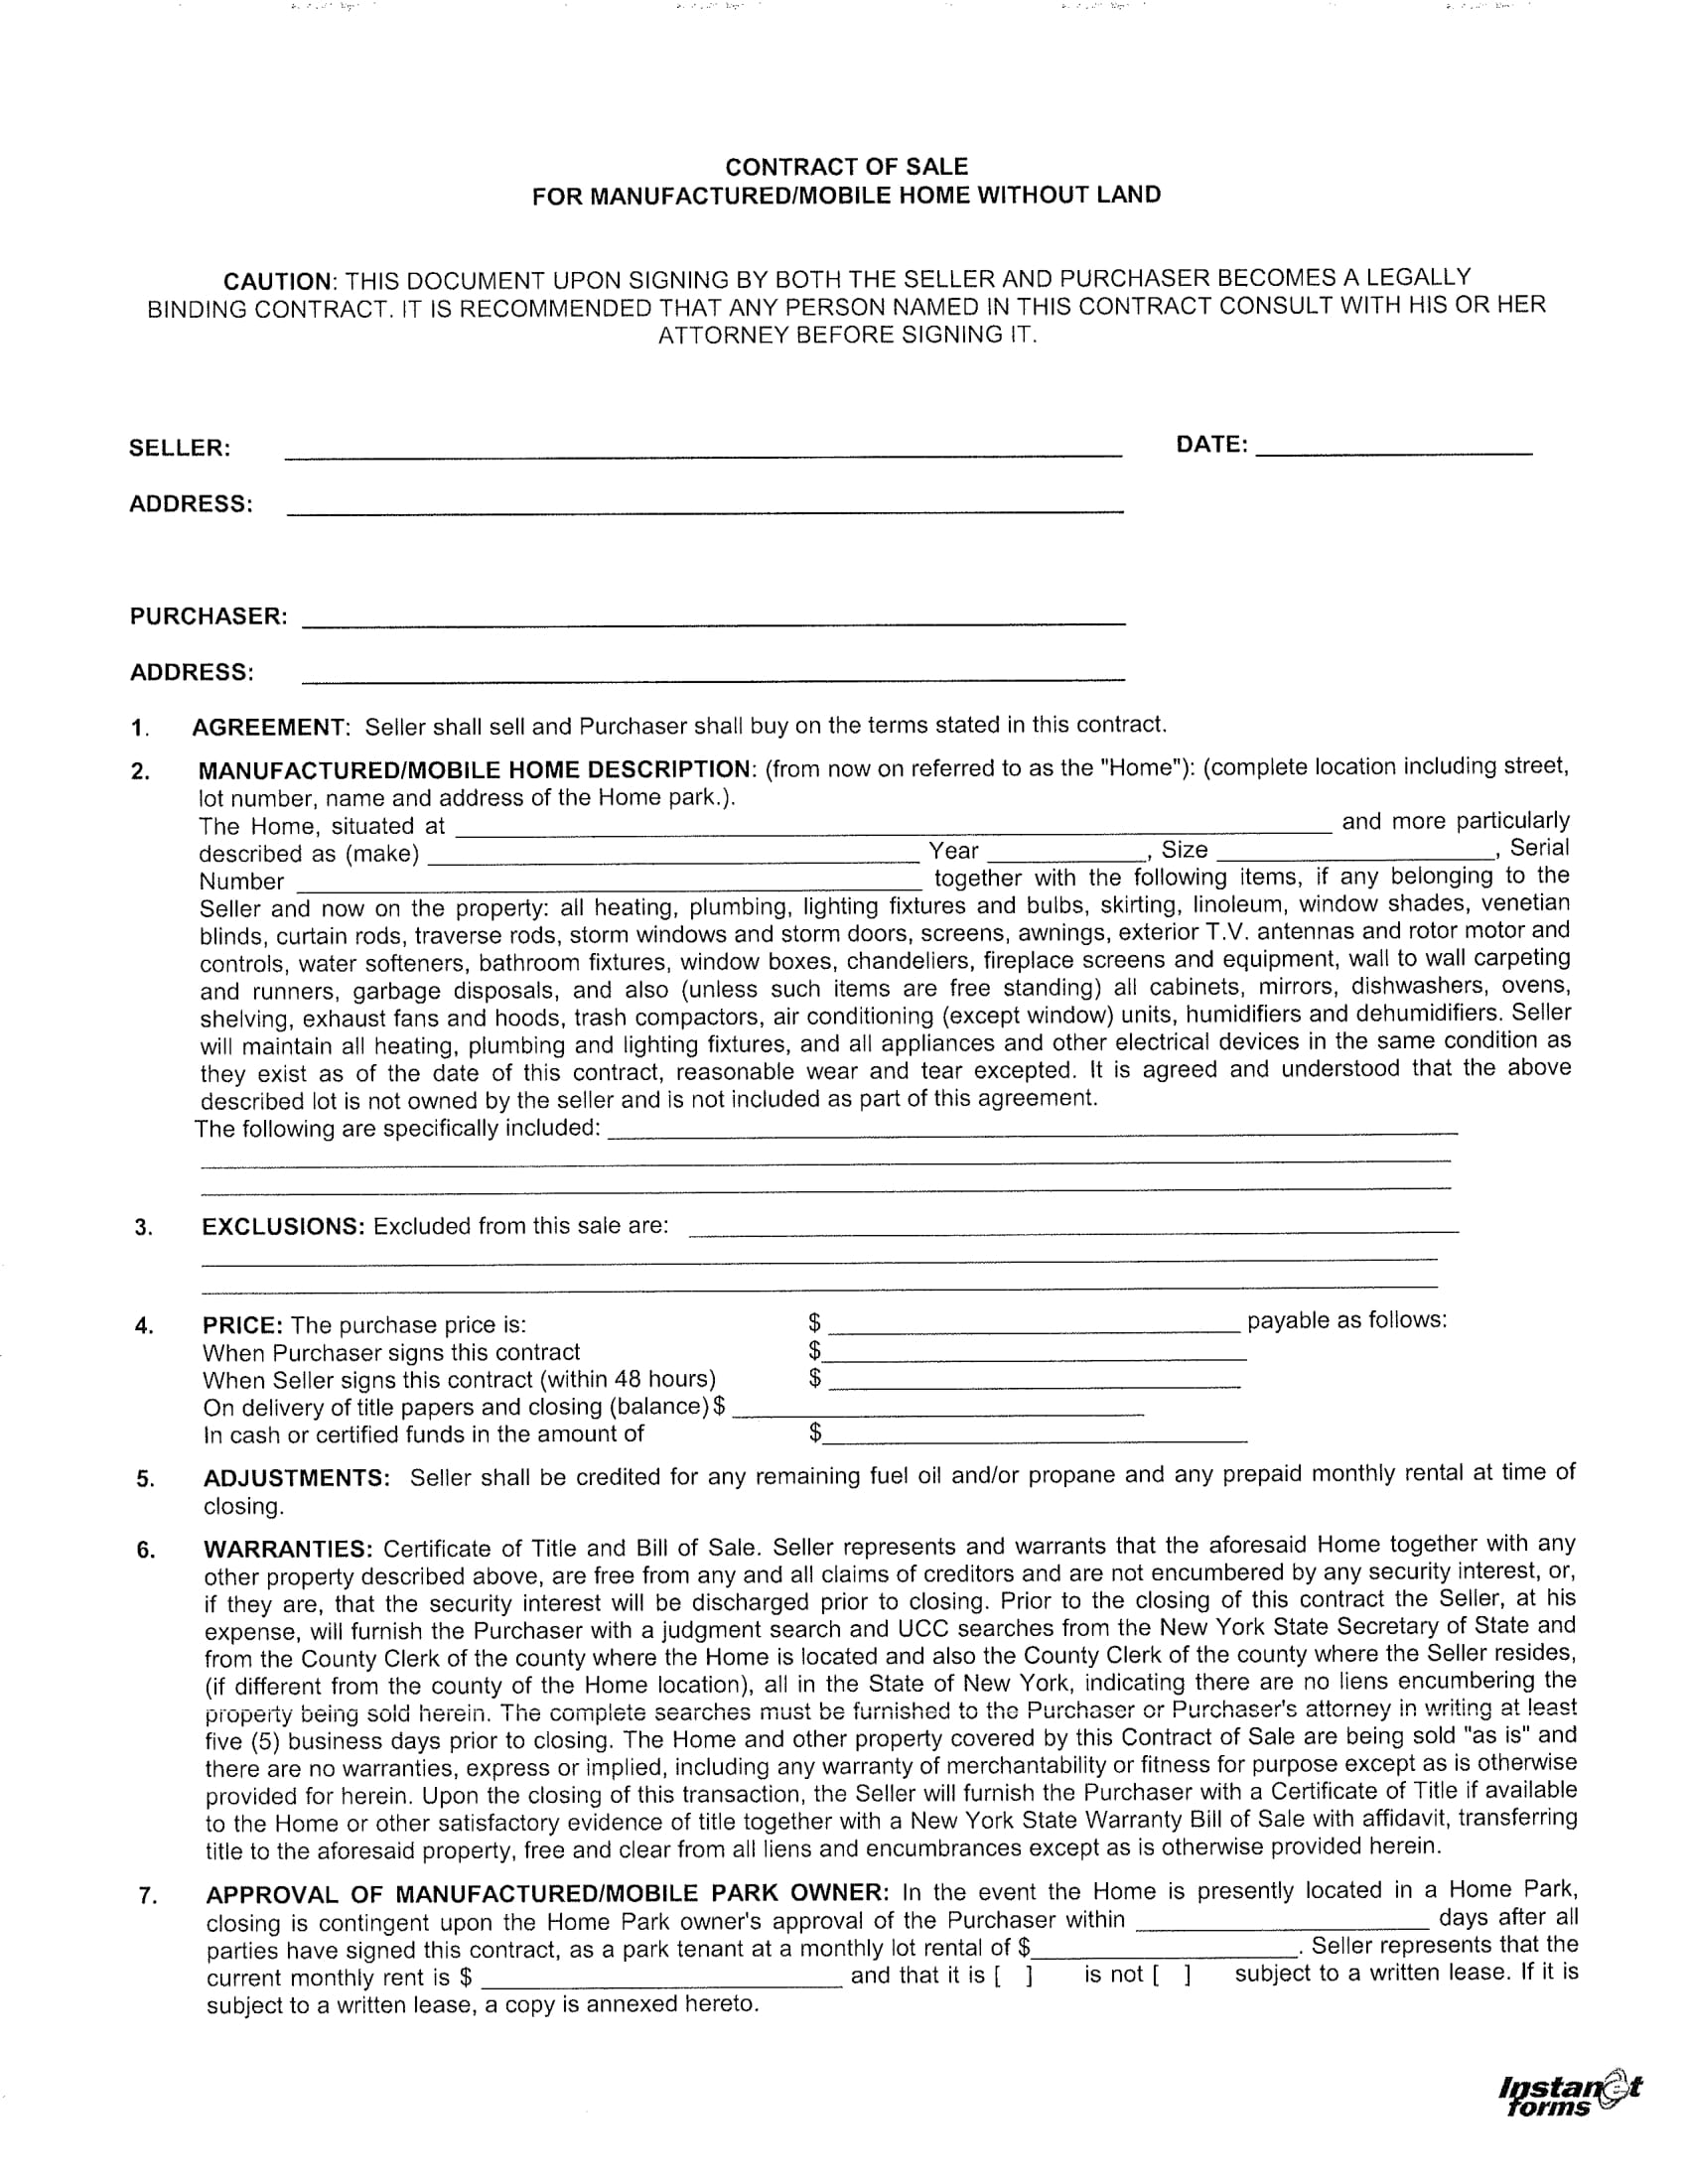 mobile home sale contract form 1